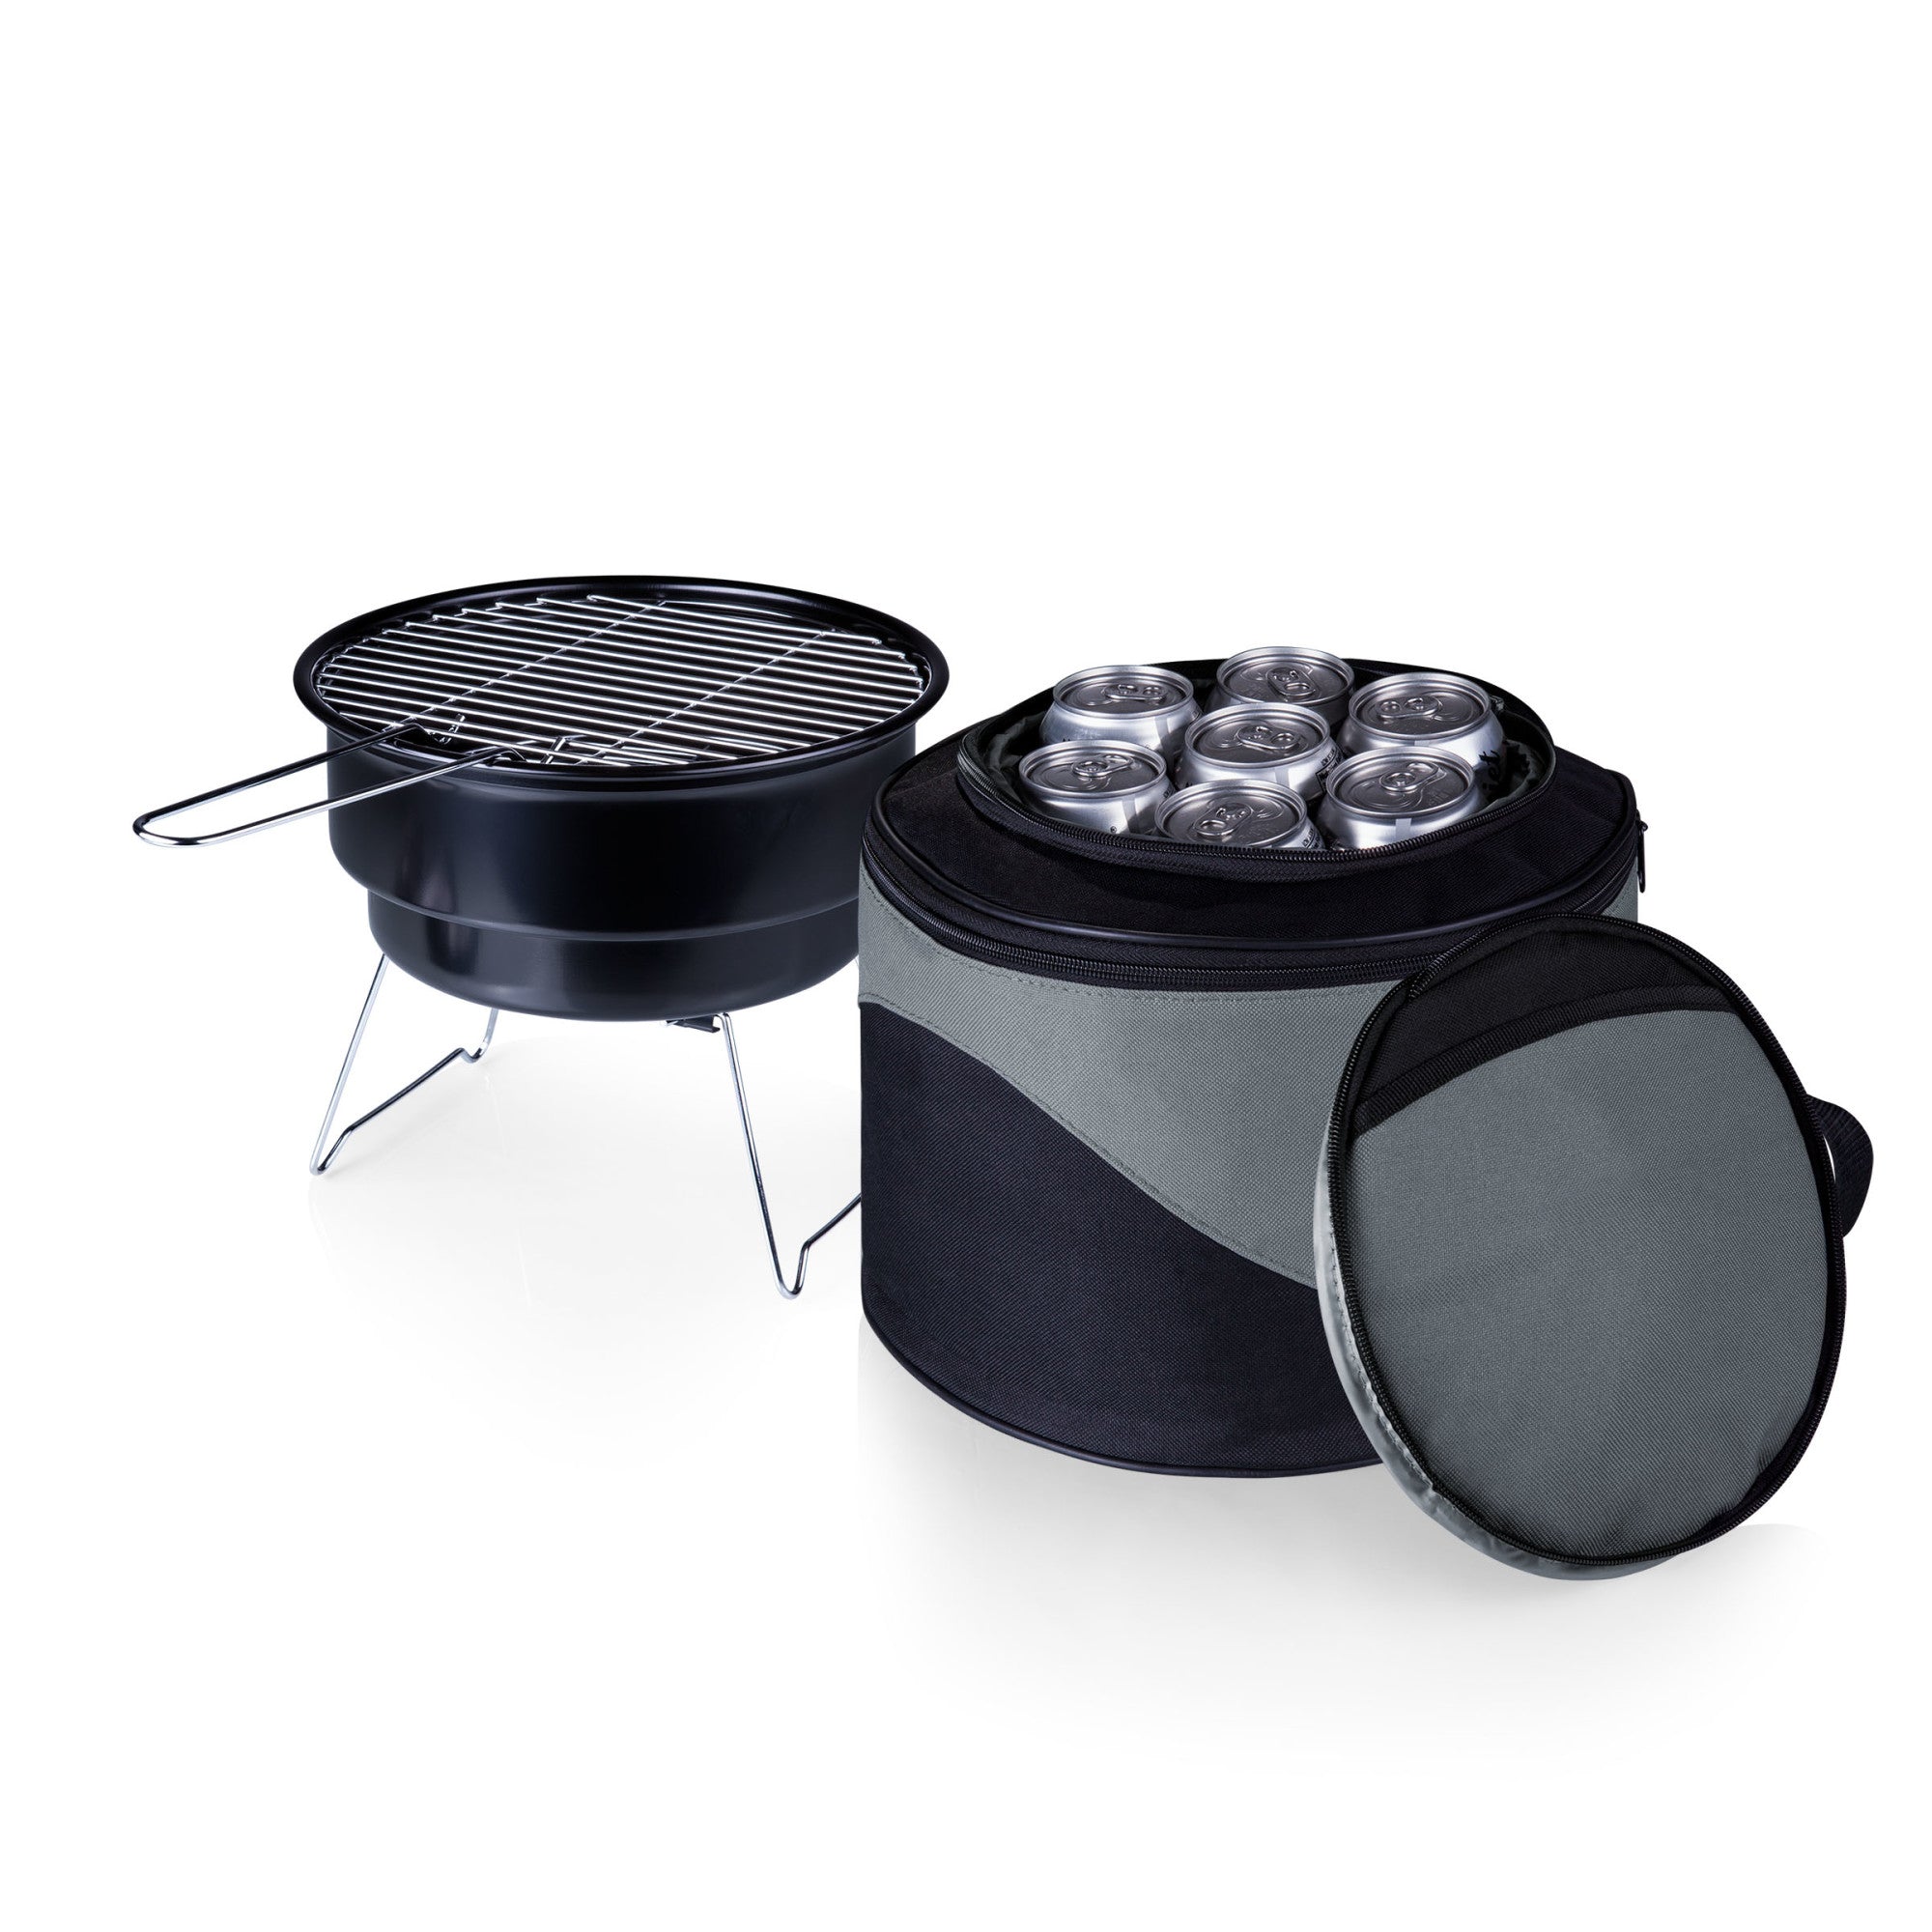 Octpeak Portable Charcoal Grill,Household Mini Lightweight Smokeless  Barbecue Grill Charcoal Stove BBQ Accessories For Camping, Picnic, Outdoor  26x21x12.5cm 